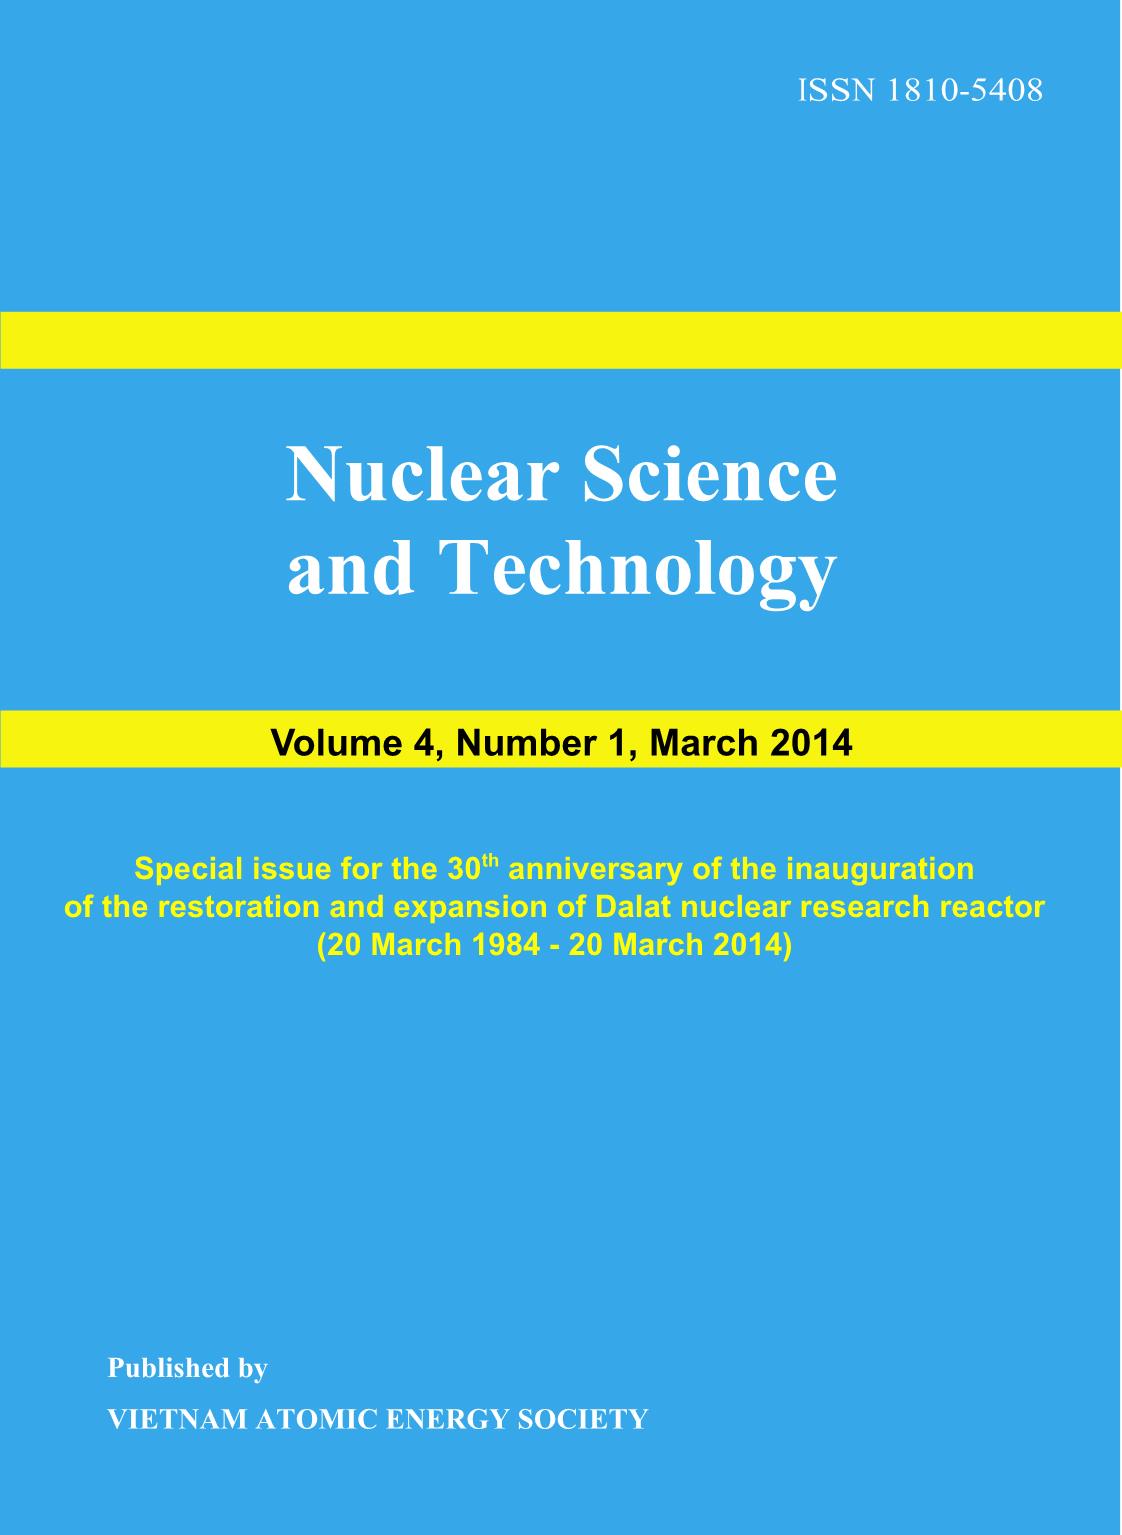 Nuclear Science and Technology - Volume 4, Number 1, March 2014 trang 1